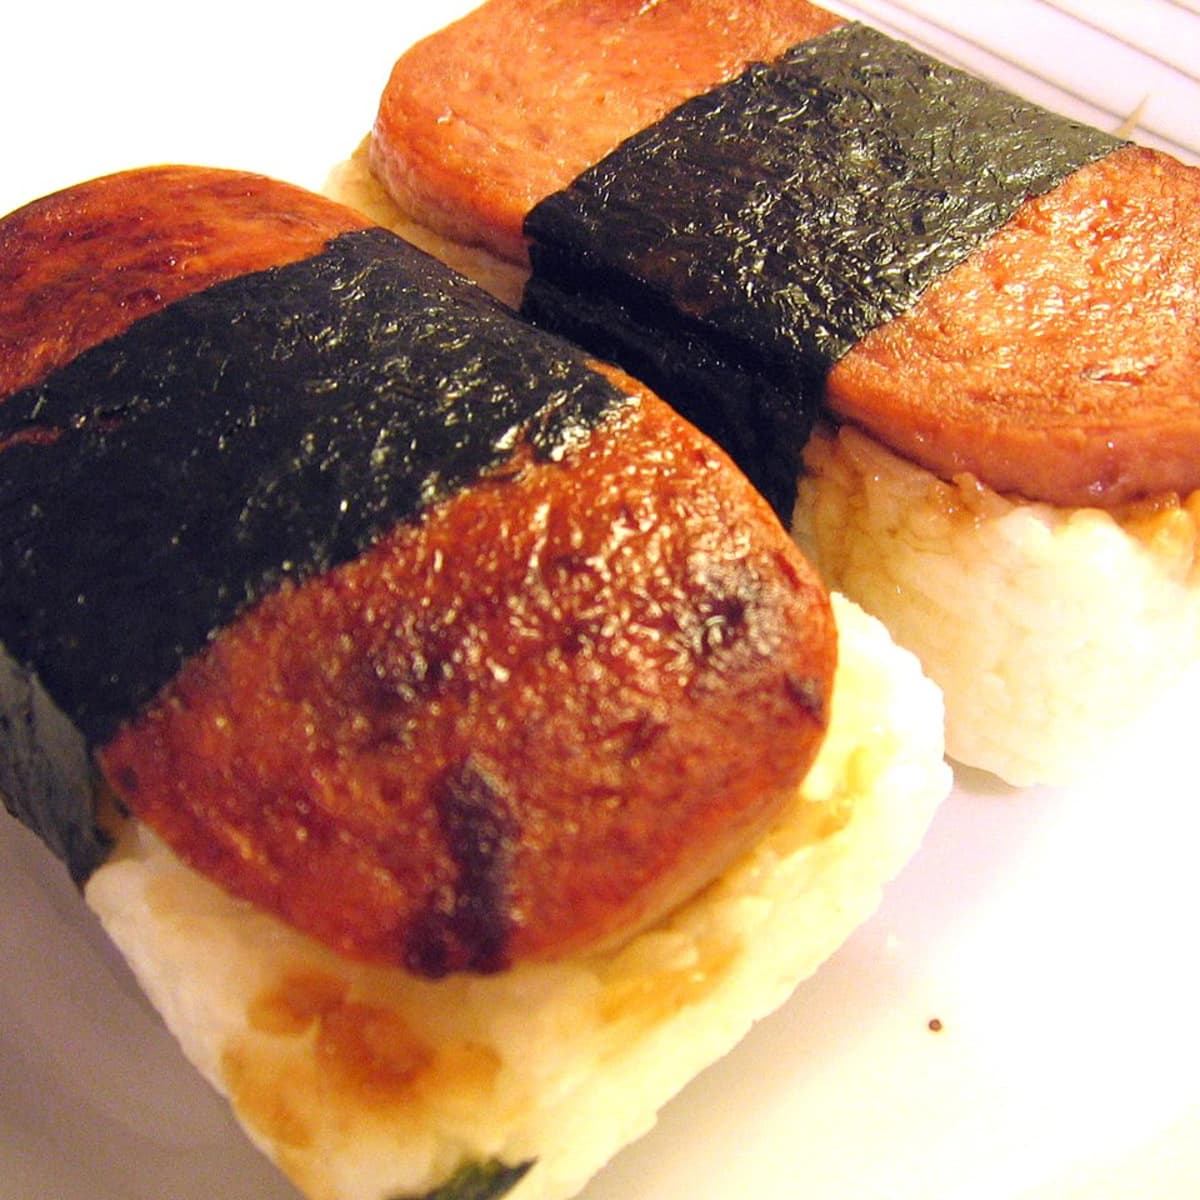 TURKEY SPAM MUSUBI with or without Egg